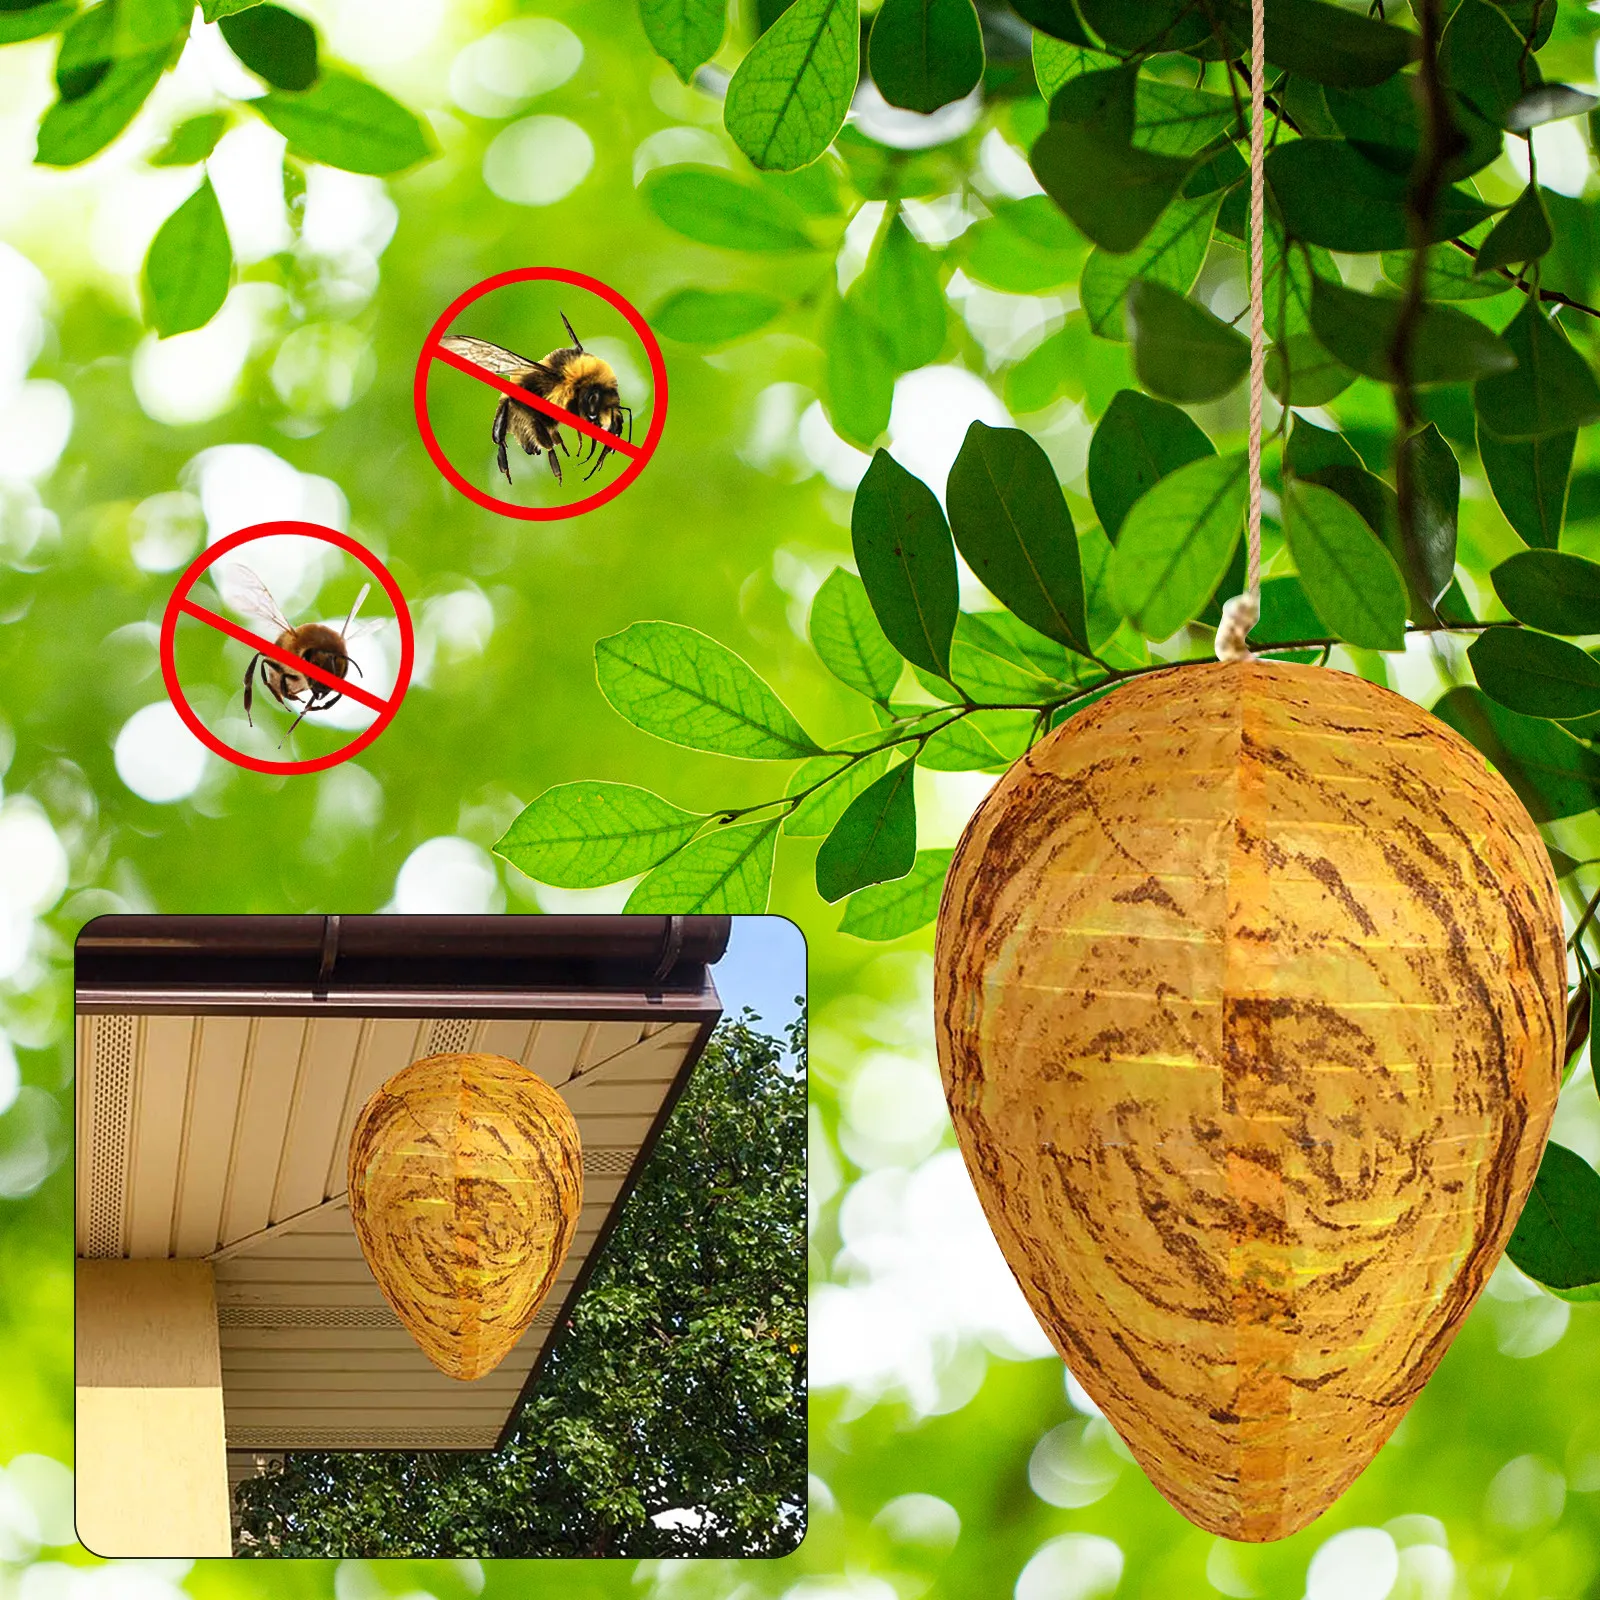 2pcs Wasp Nest Decoy Fake Wasp Nest Non-Toxic Wasp Deterrent Repellent Effective Pest Control Natural Non-Toxic for Wasps Hornet